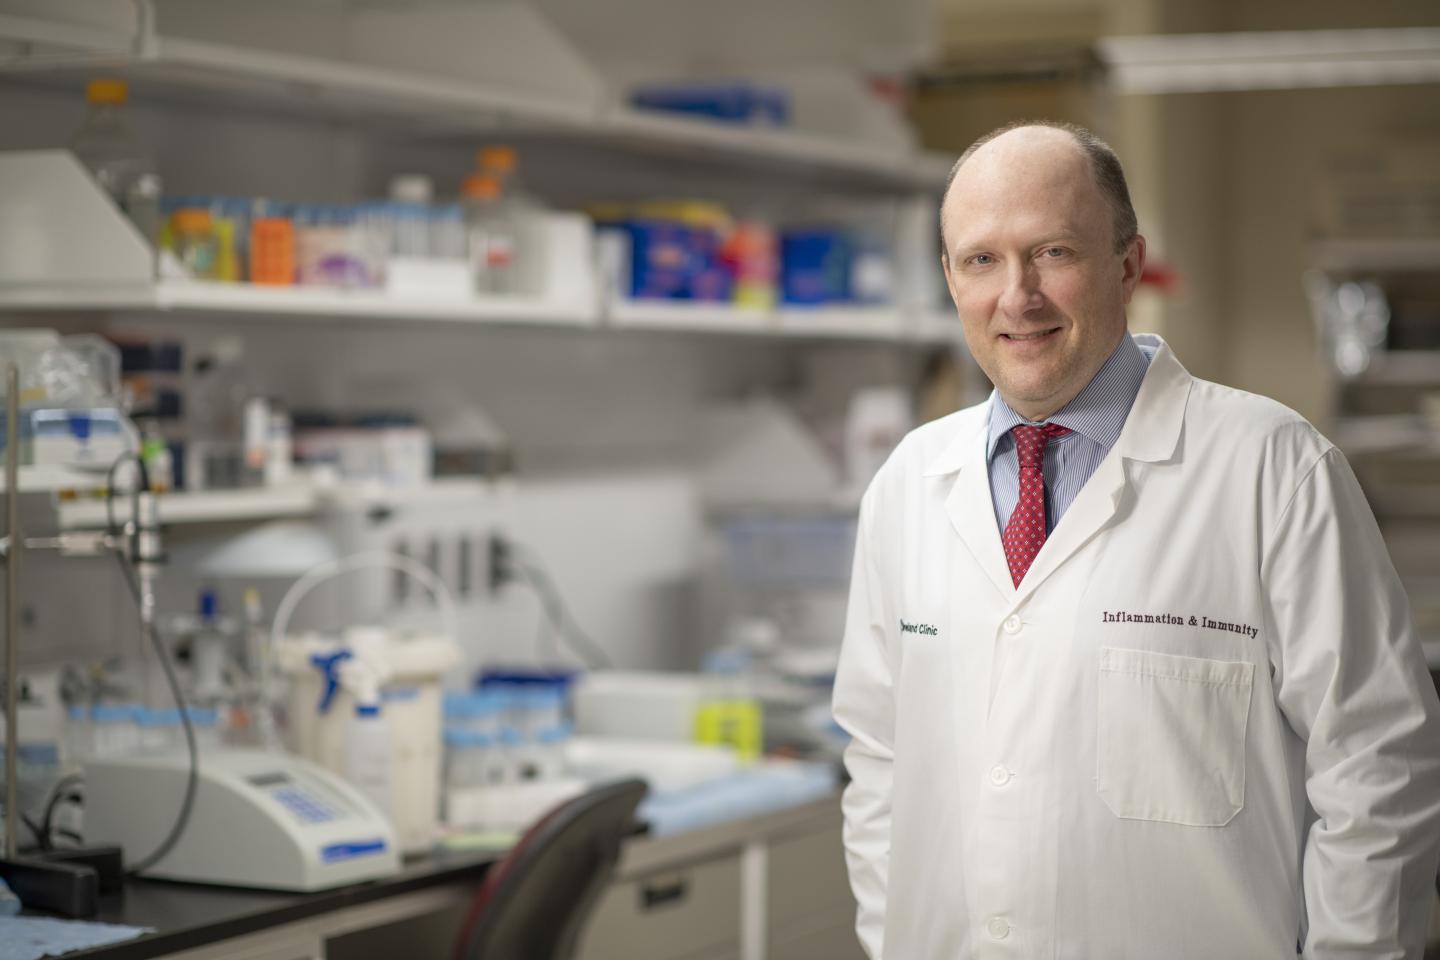 Thaddeus Stappenbeck, MD, PhD, of Cleveland Clinic Lerner Research Institute